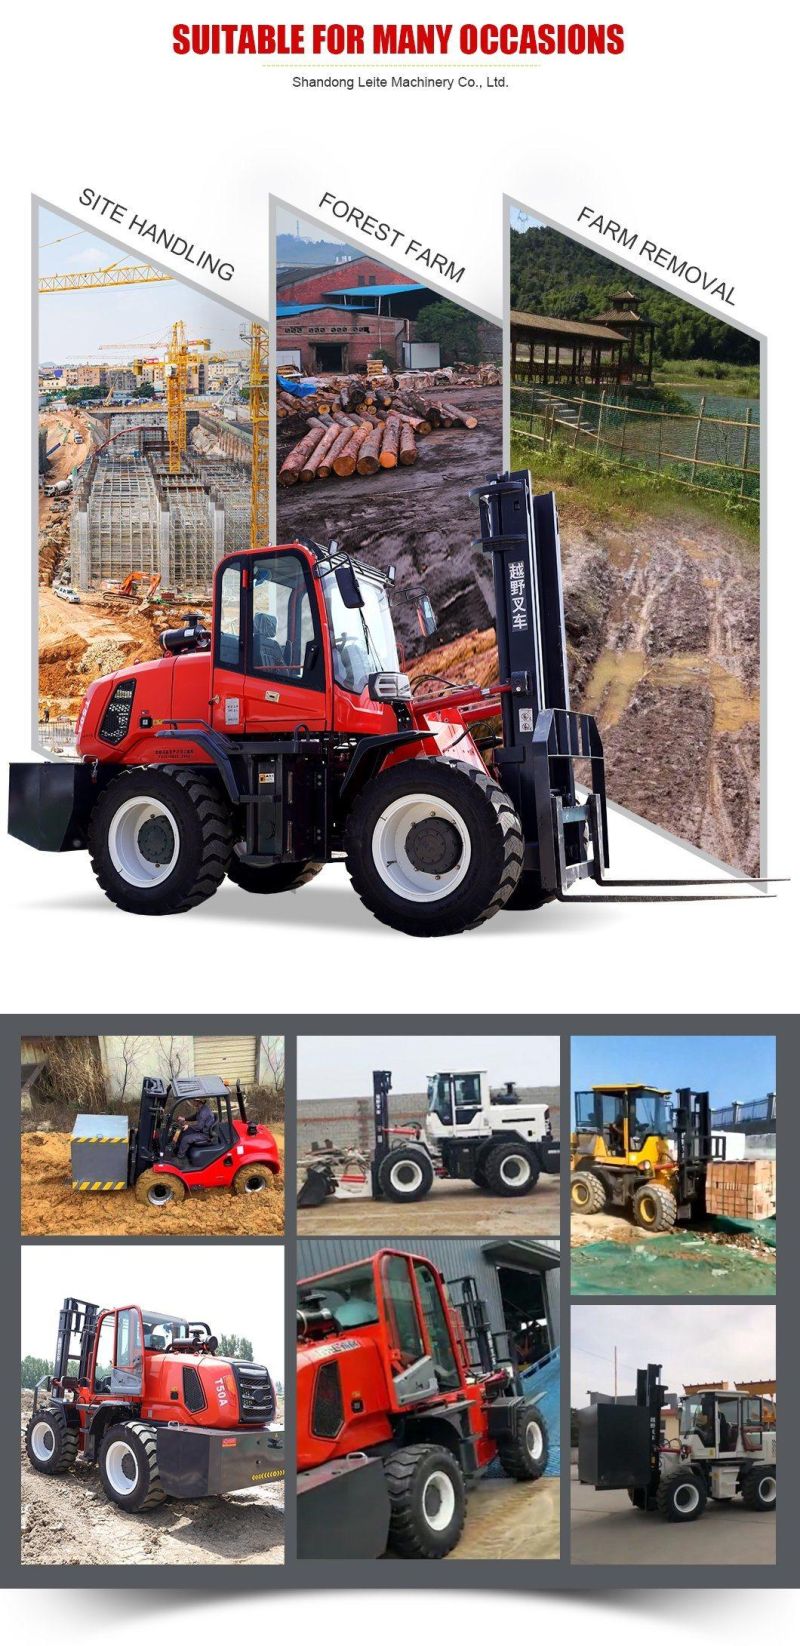 Mountain Crane Loader Internal Combustion Four-Wheel Drive Cross-Country Forklift 5 Tons Diesel Forklift Hydraulic Forklift